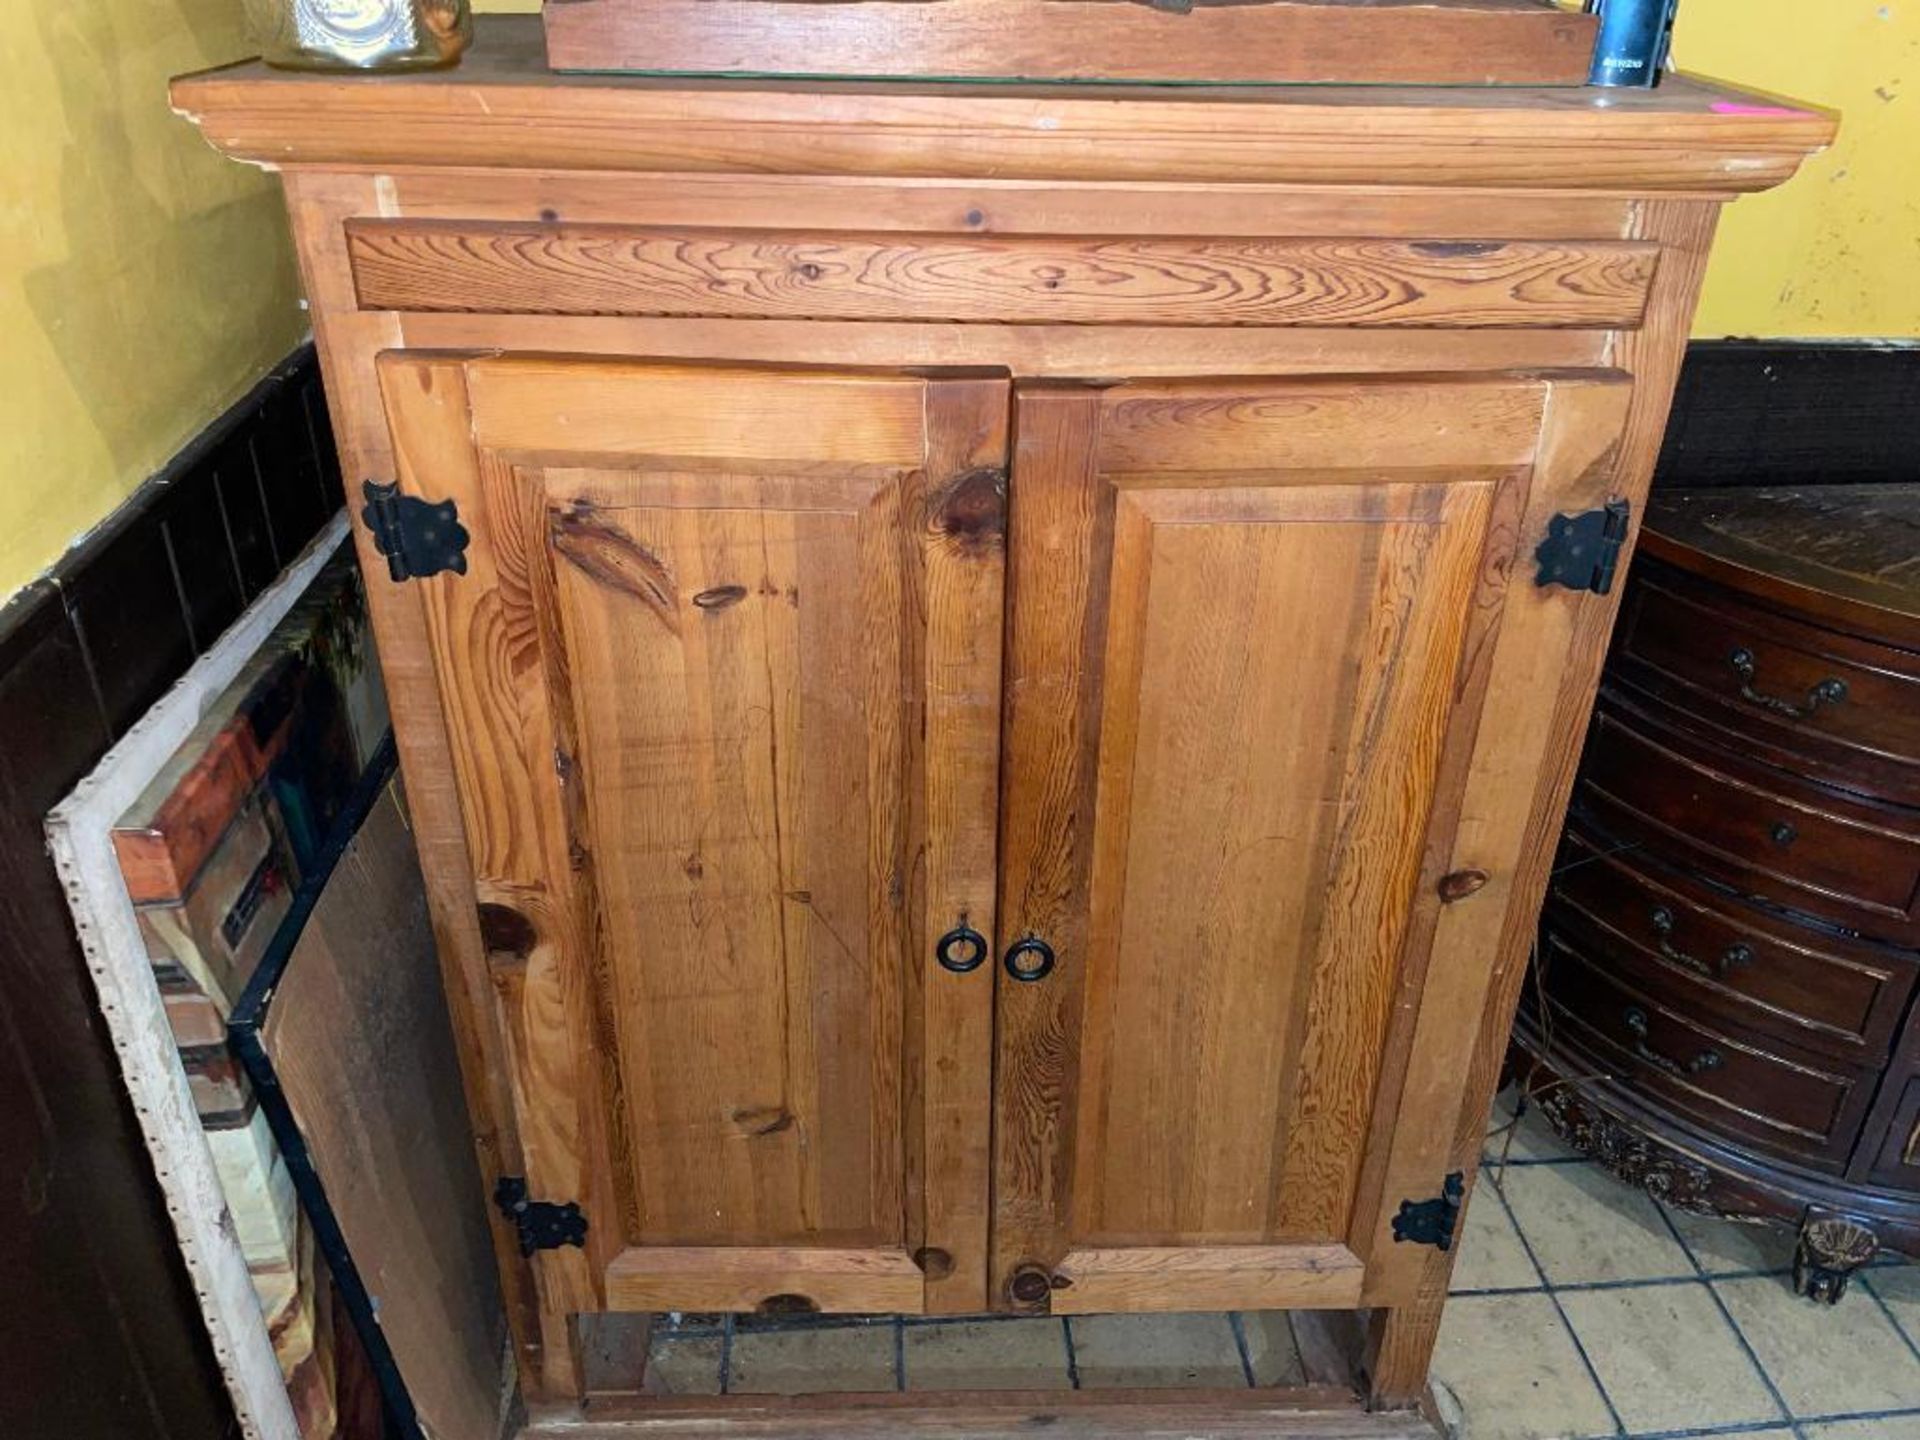 DESCRIPTION: 43" OAK MEDIA CABINET W/ NATURAL WOOD FINISH ADDITIONAL INFORMATION IN GOOD CONDITION S